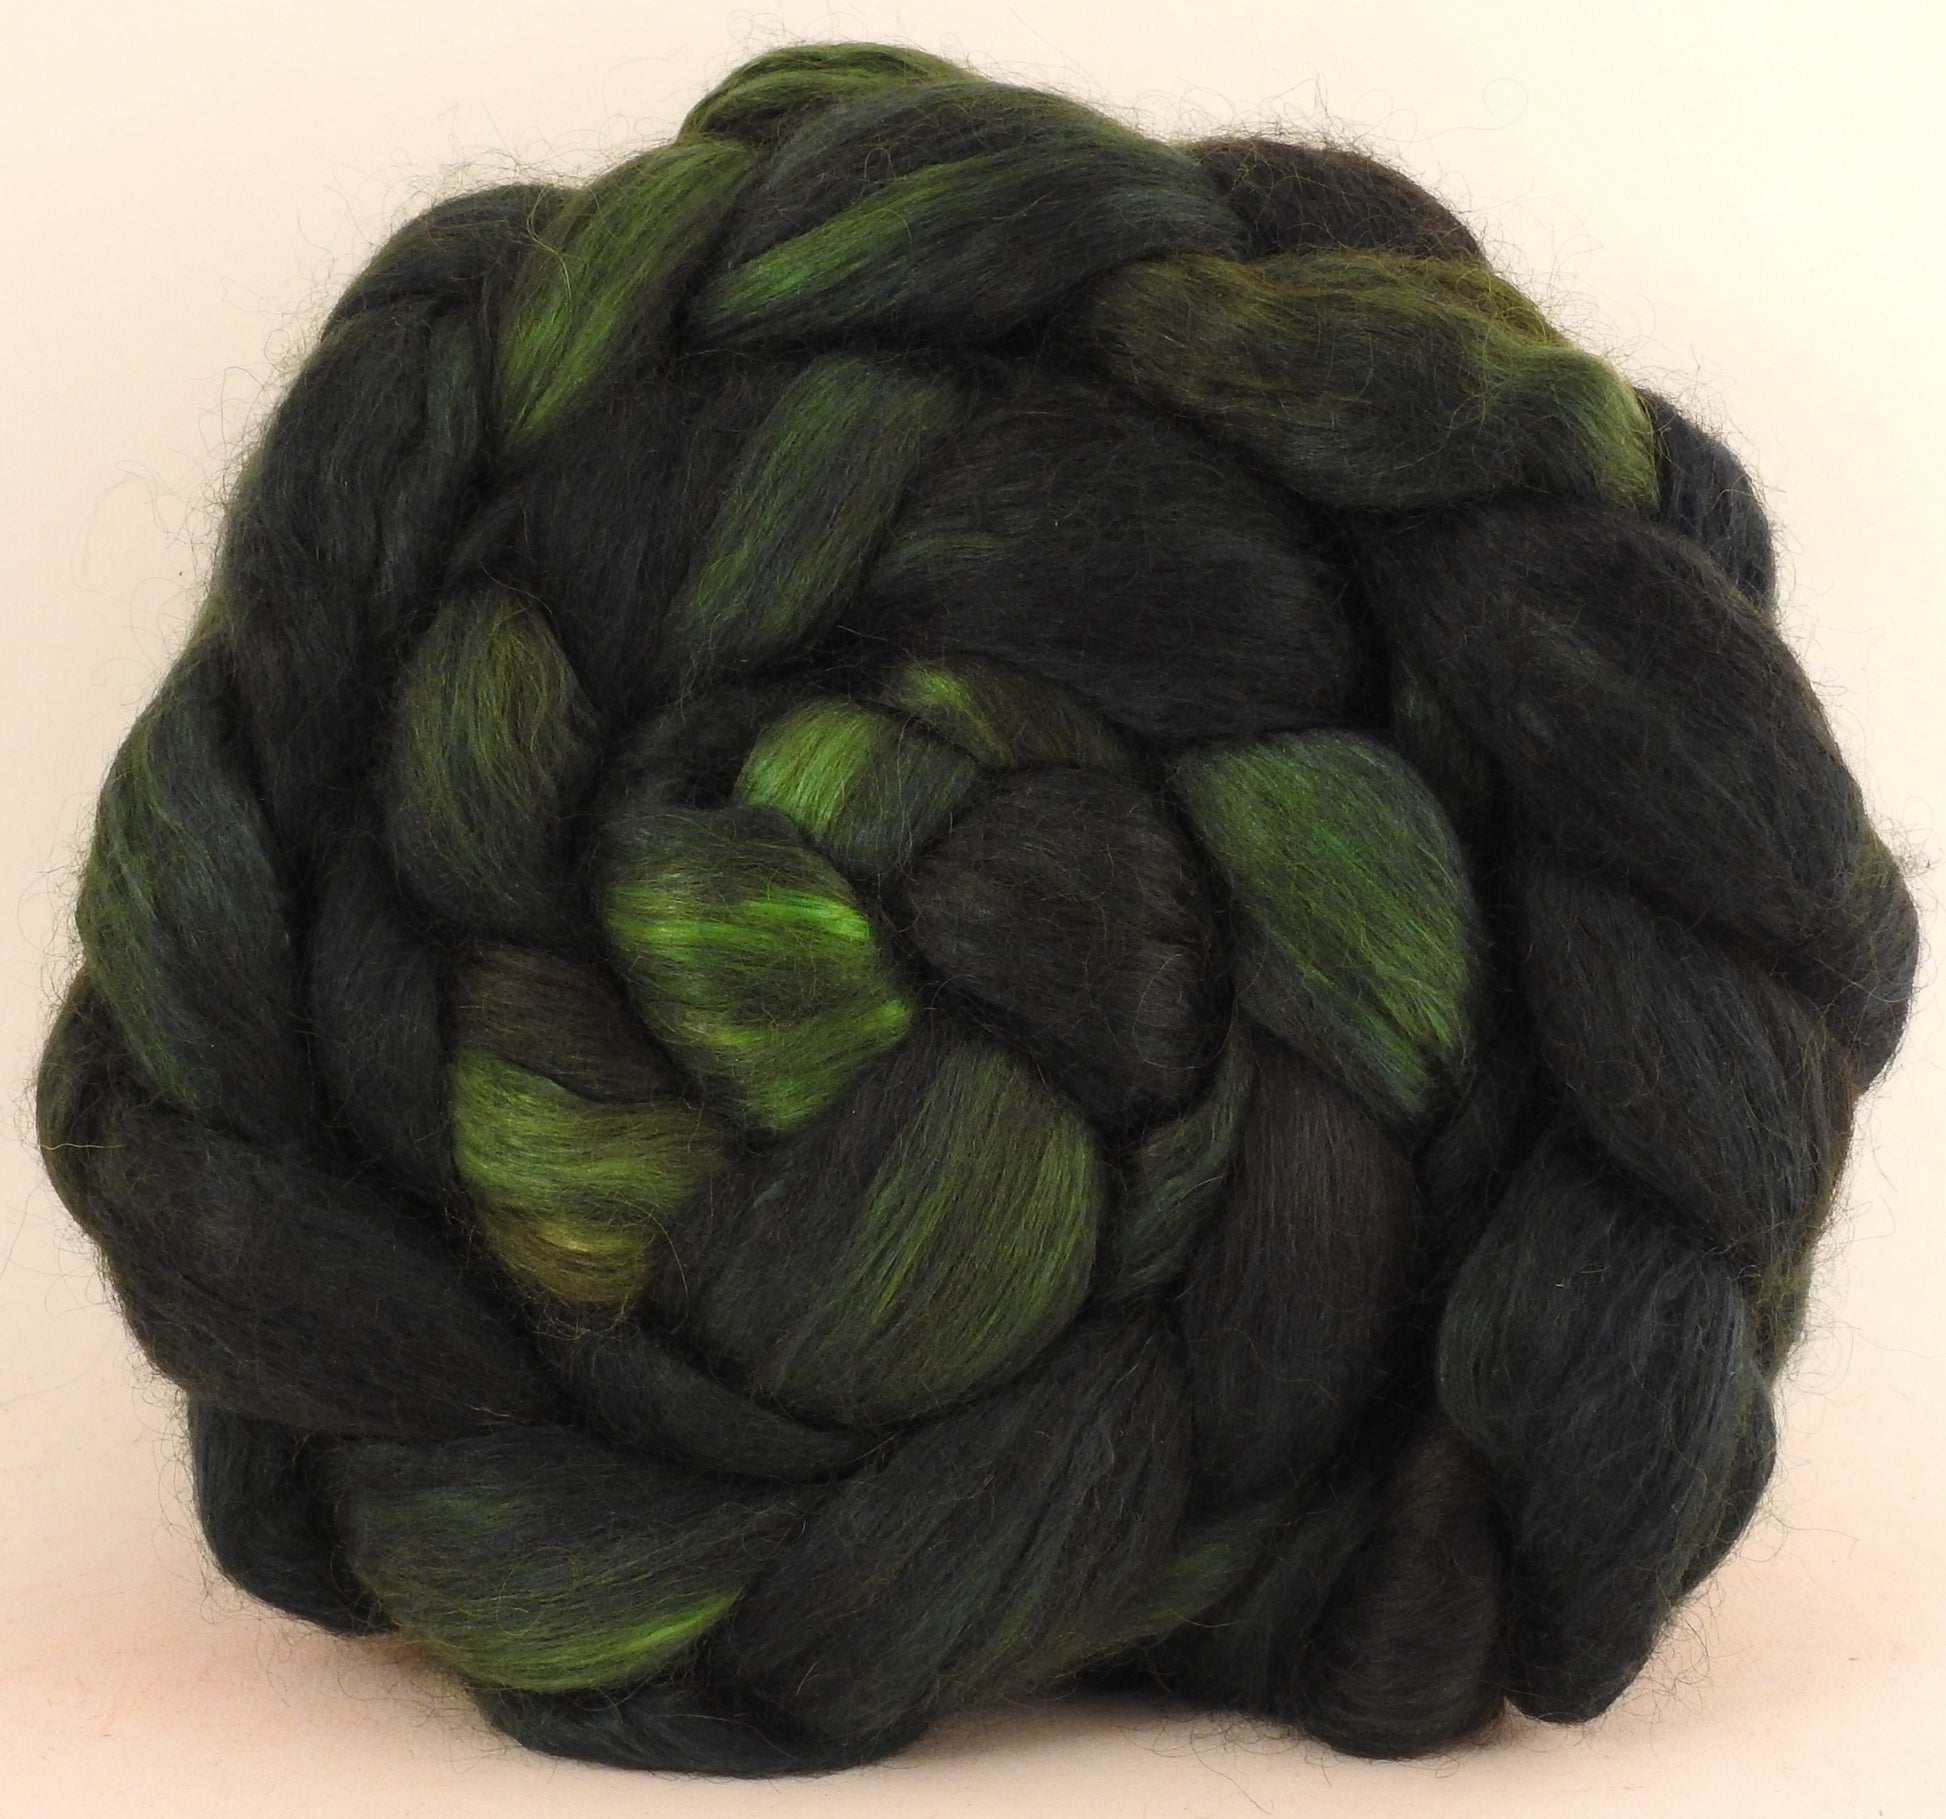 Hand-dyed wensleydale/ mulberry silk roving (65/35) - Philodendron - Inglenook Fibers